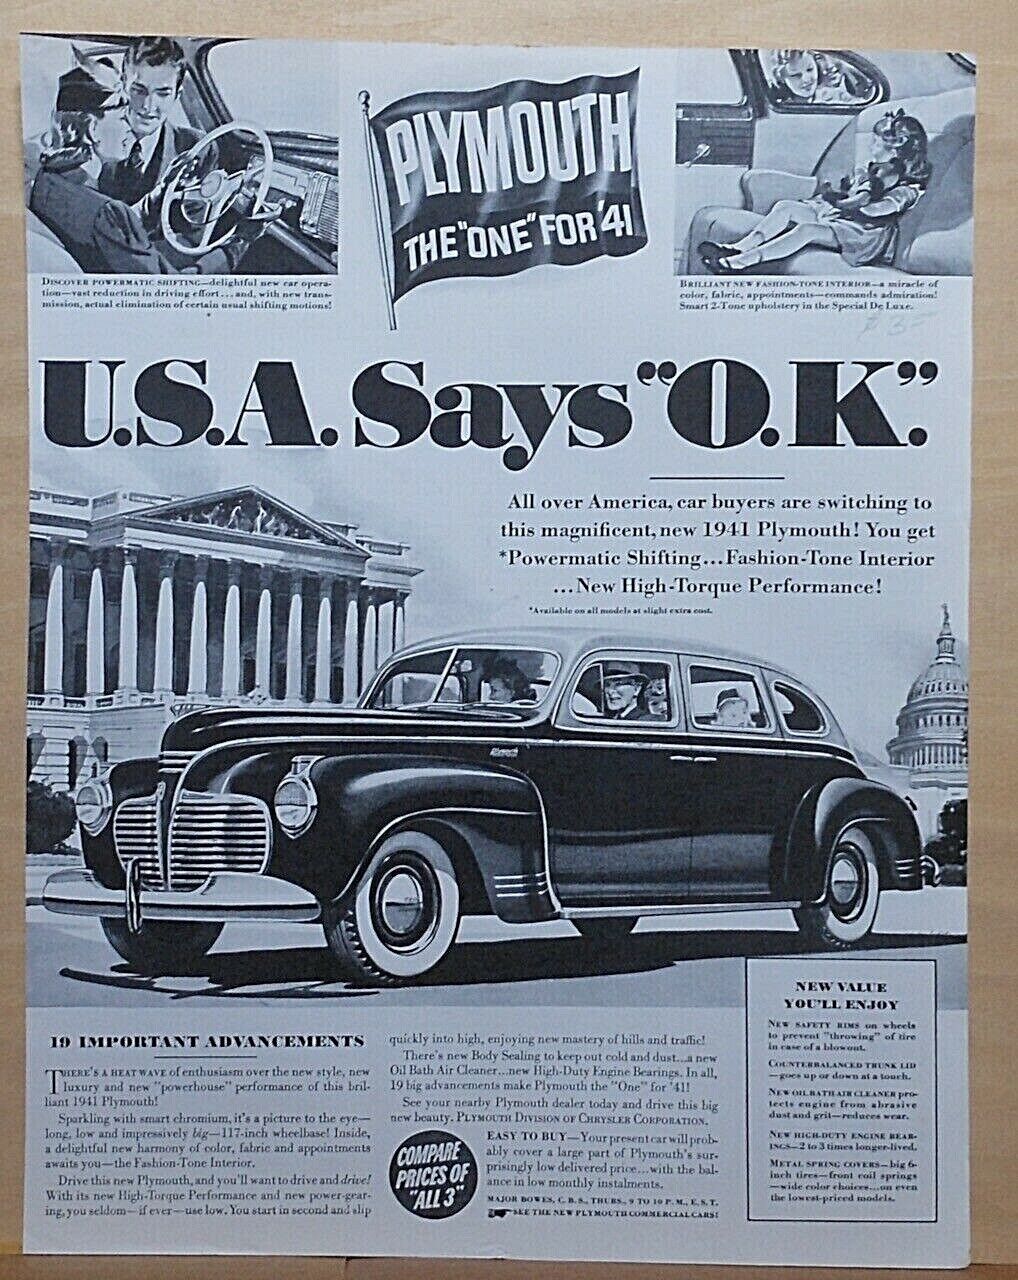 1940 magazine ad for Plymouth - USA Says OK, 19 Important Advancements